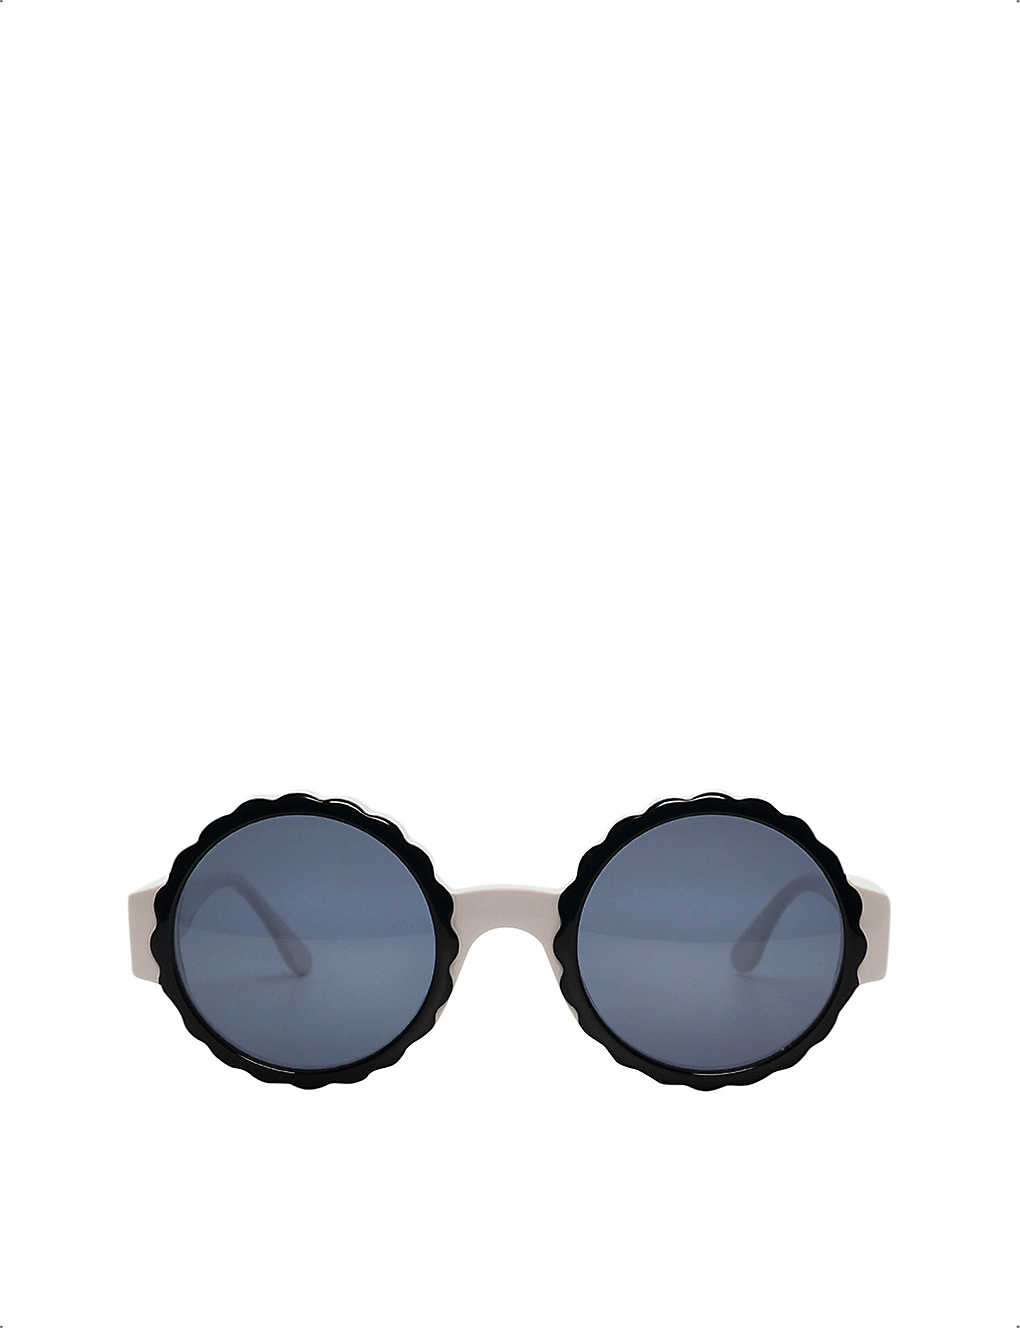 THE VINTAGE TRAP - Pre-loved 90s Chanel FL99 round-frame acetate ...